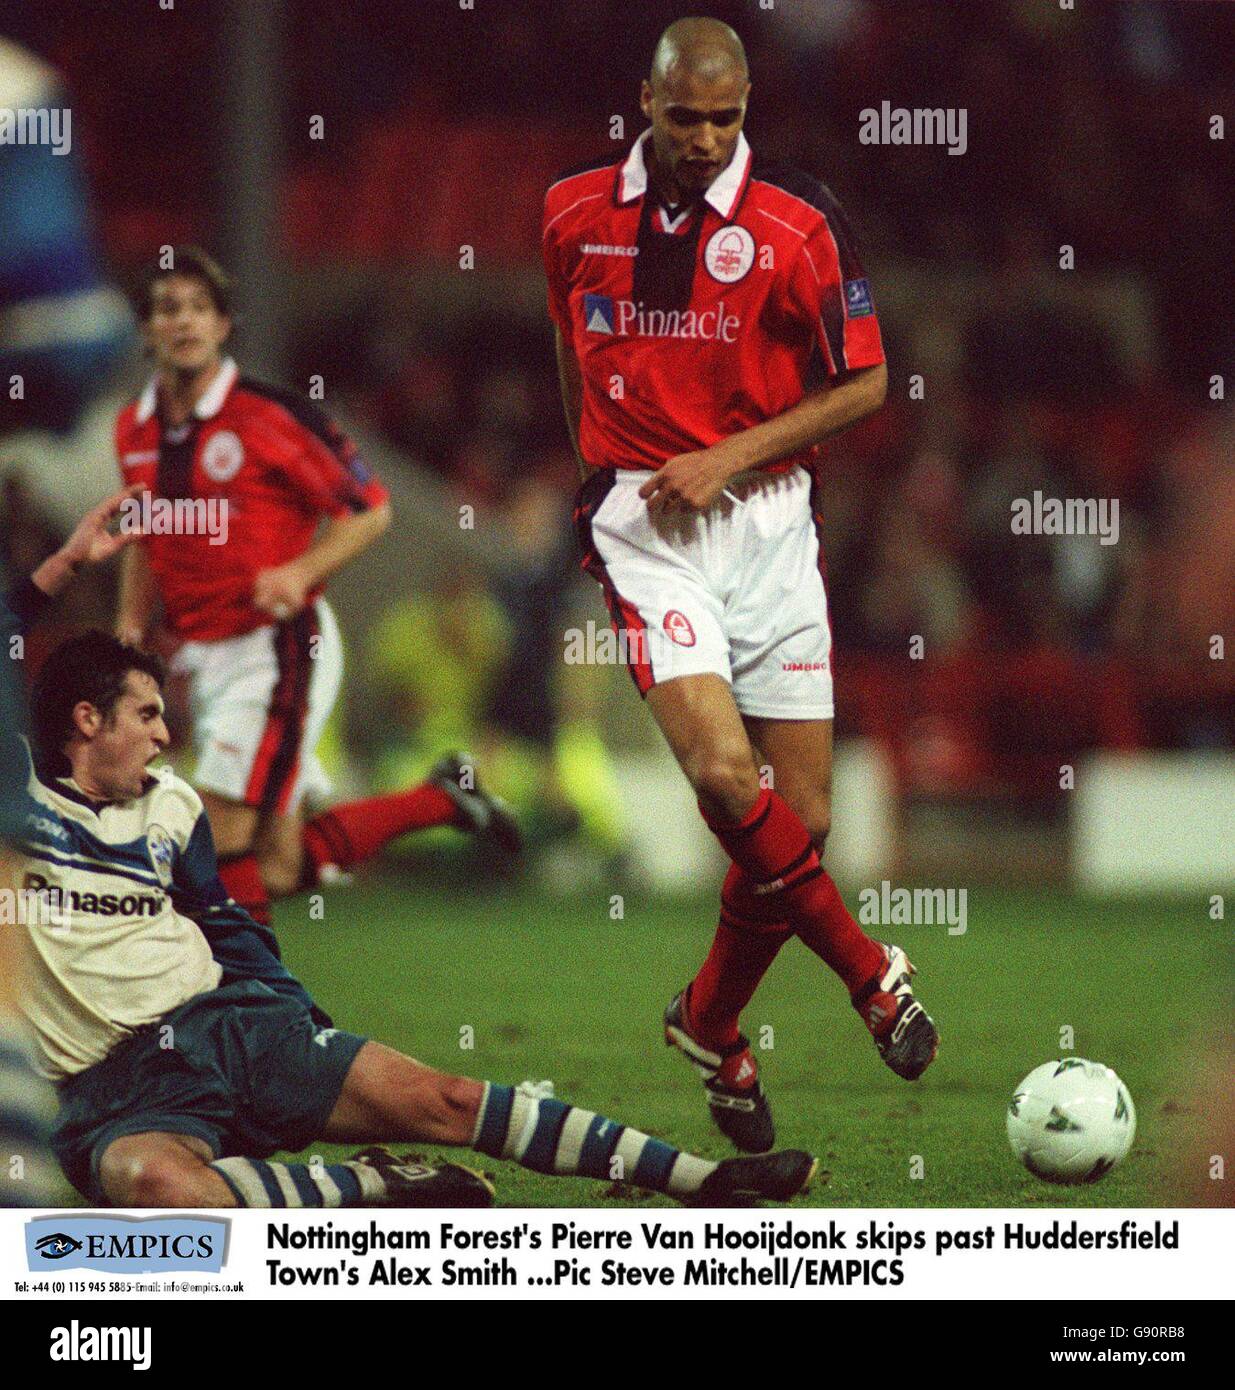 Soccer - Nationwide League Division One - Nottingham Forest v Huddersfield Town. Nottingham Forest's Pierre Van Hooijdonk skips past Huddersfield Town's Alex Smith Stock Photo